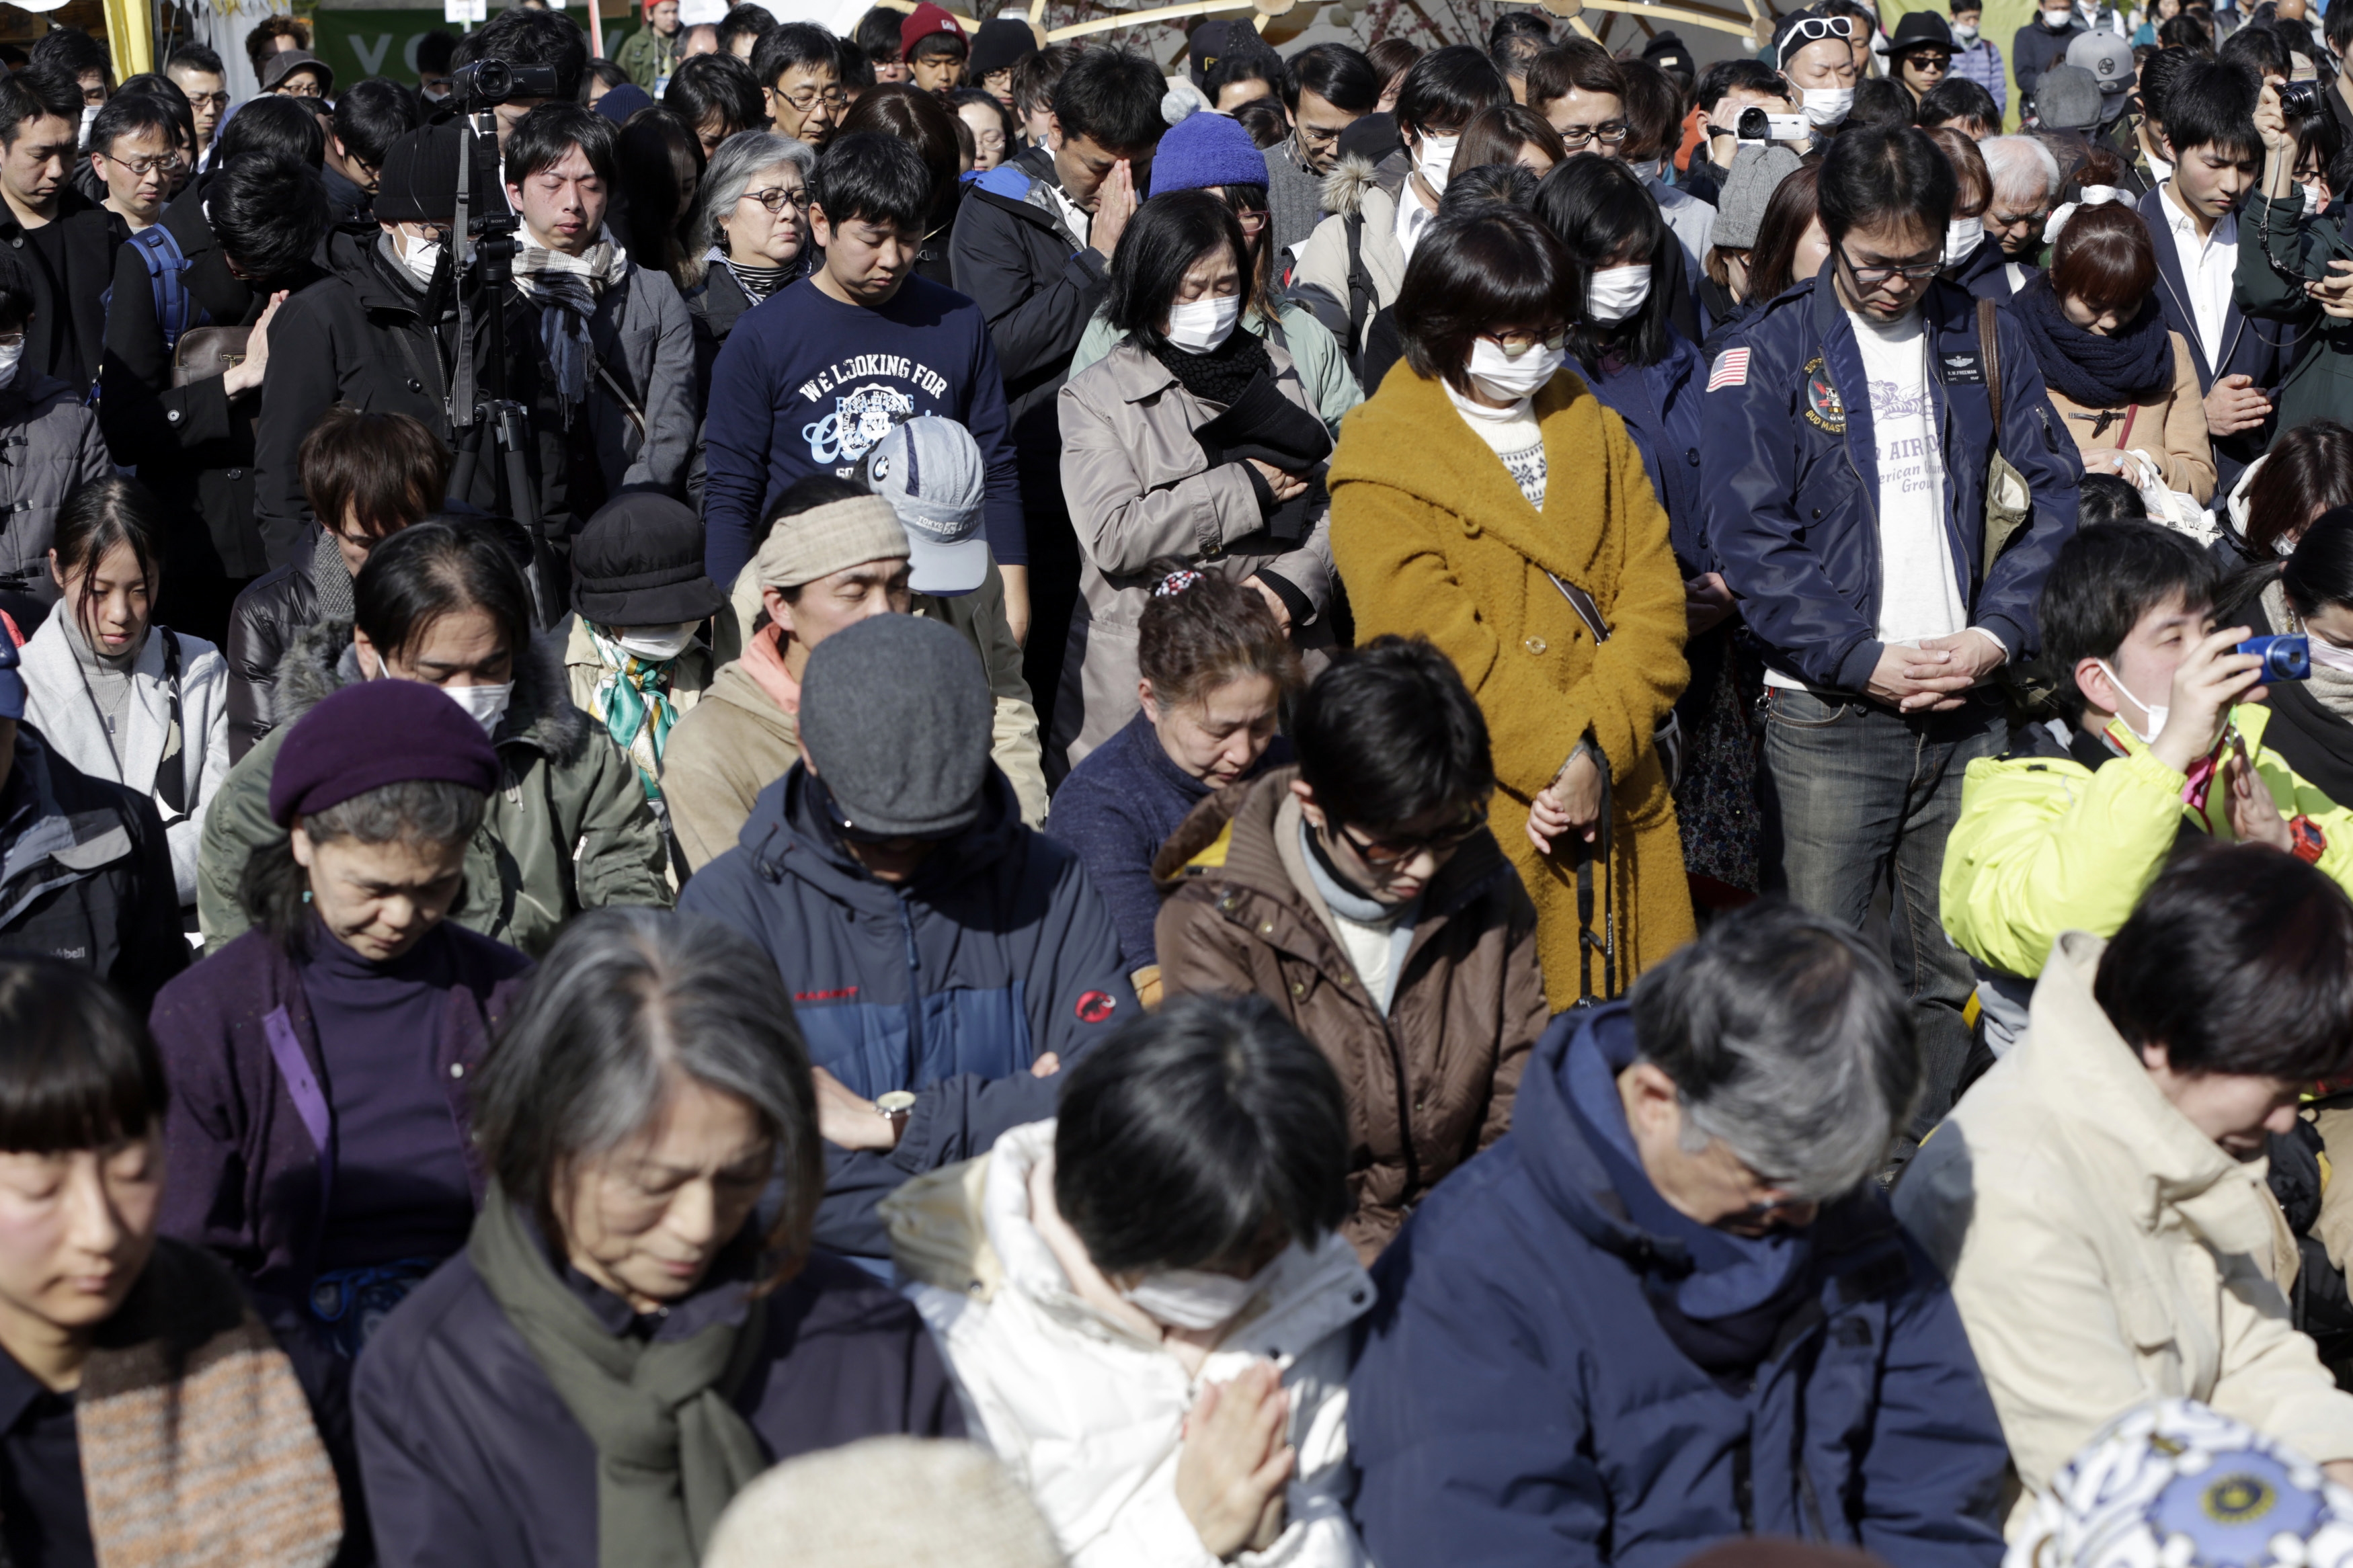 People mourn the victims of the March 11, 2011 earthquake and tsunami during a special memorial event in Tokyo, Saturday, March 11, 2017. Japan on Saturday marked the sixth anniversary of the 2011 tsunami that killed more than 18,000 people and left a devastated coastline along the country's northeast that has still not been fully rebuilt. (AP Photo/Eugene Hoshiko)